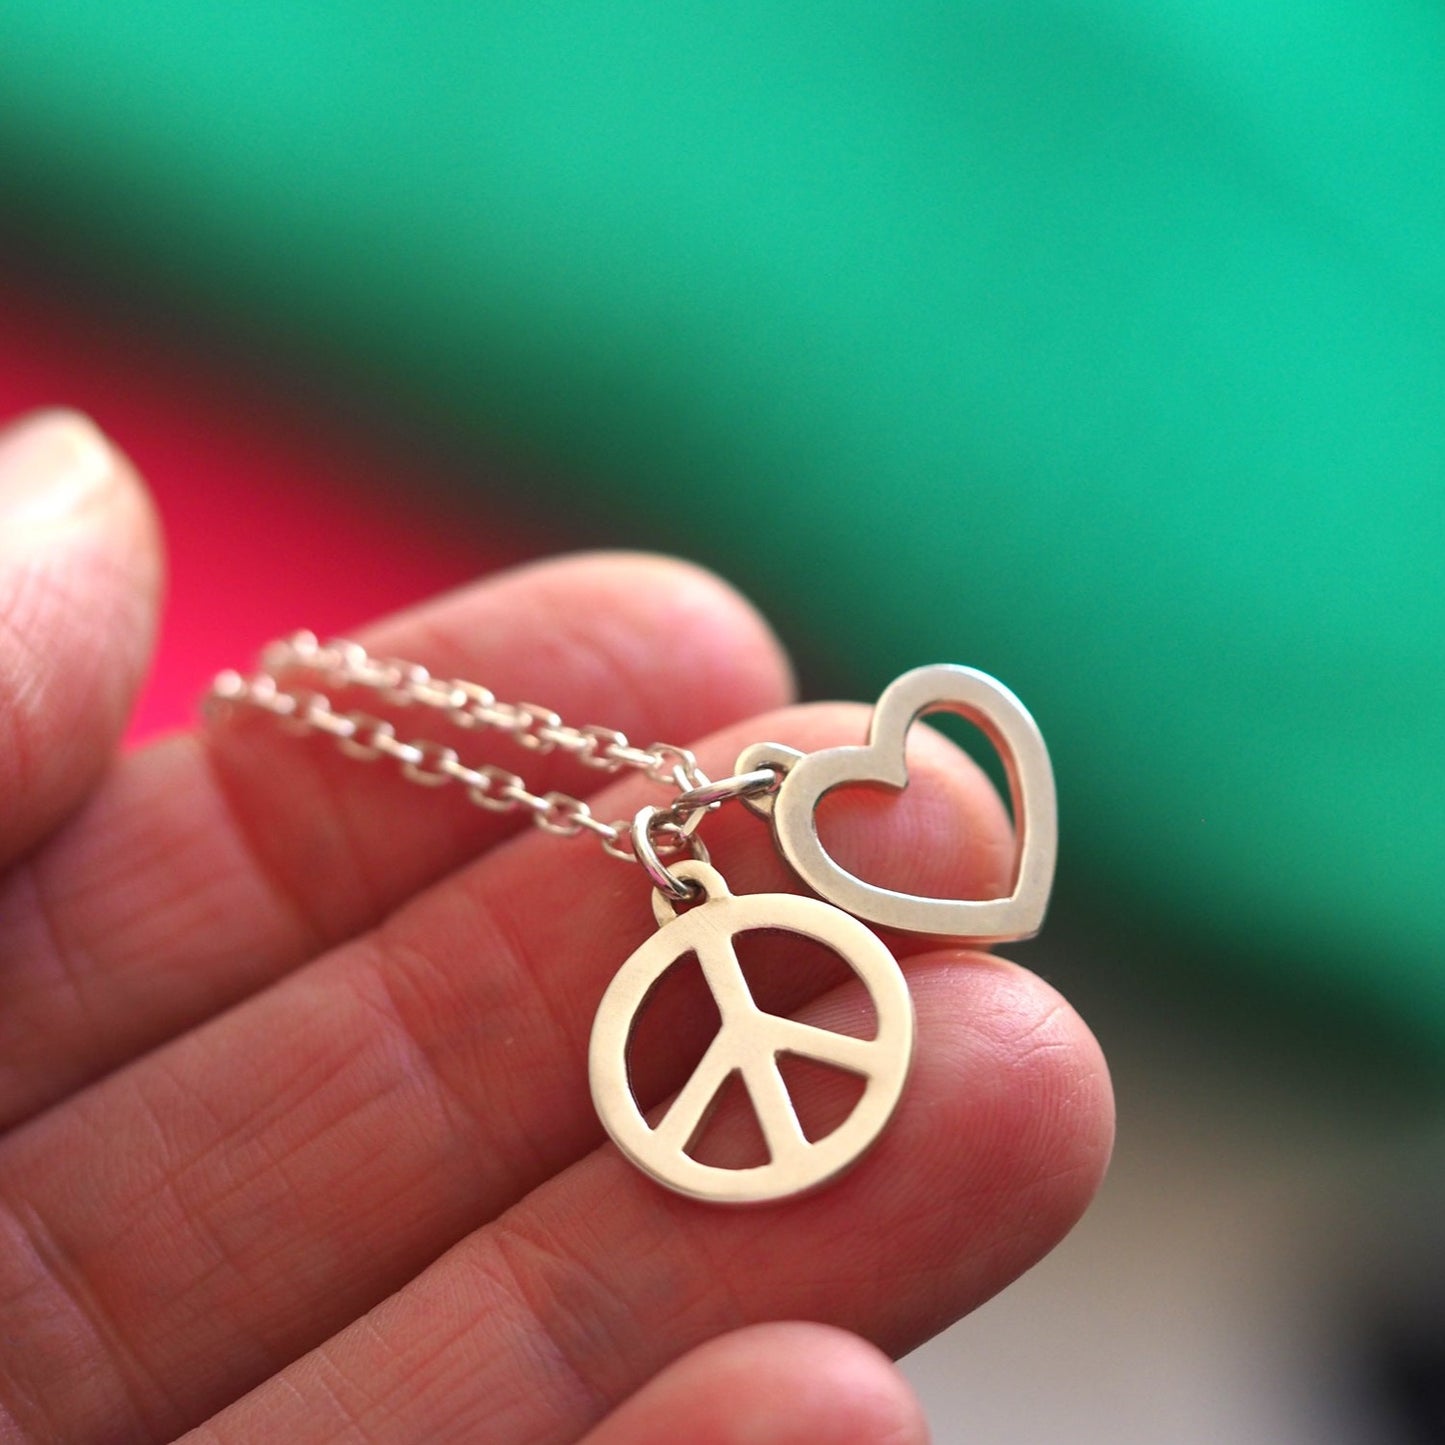 Peace and Love Necklace - Recycled Sterling Silver